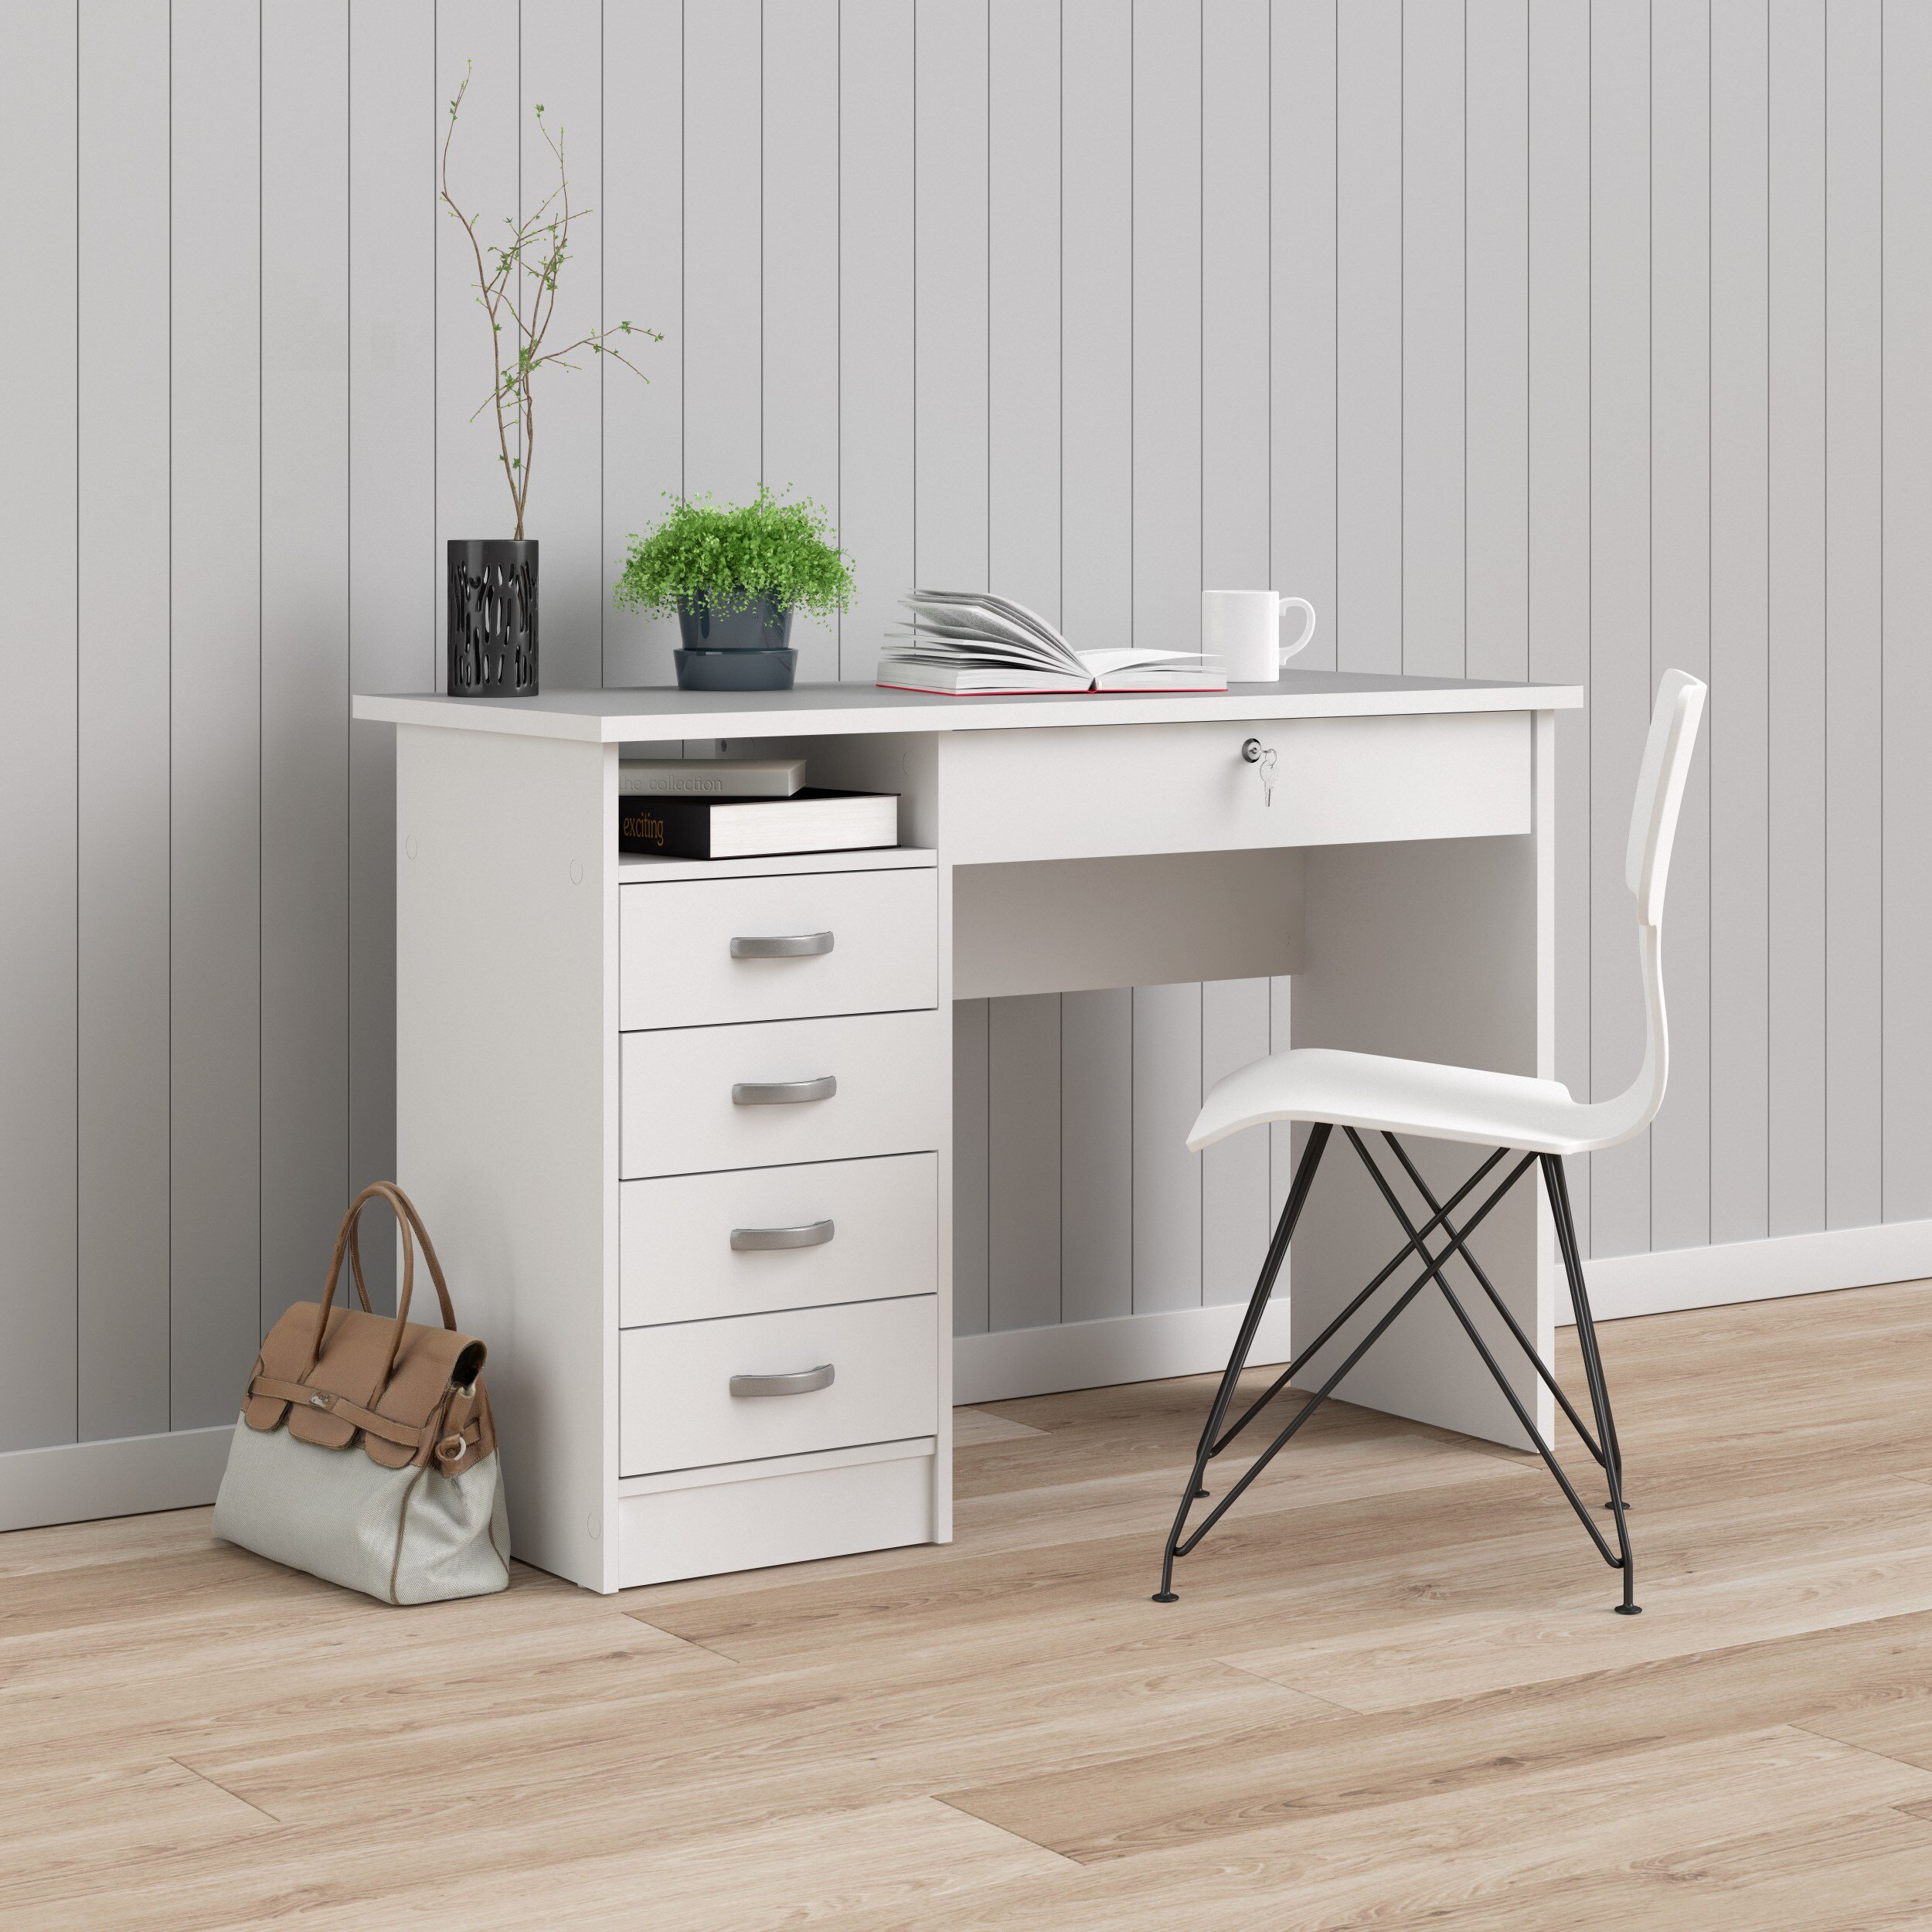 WiberWi Computer Desk with Drawers and Hutch, 43.3 inch White Home Office Desks  Small Makeup Vanity Desk Table with Storage for Small Spaces Bedroom,  Writing Desk Study Table 